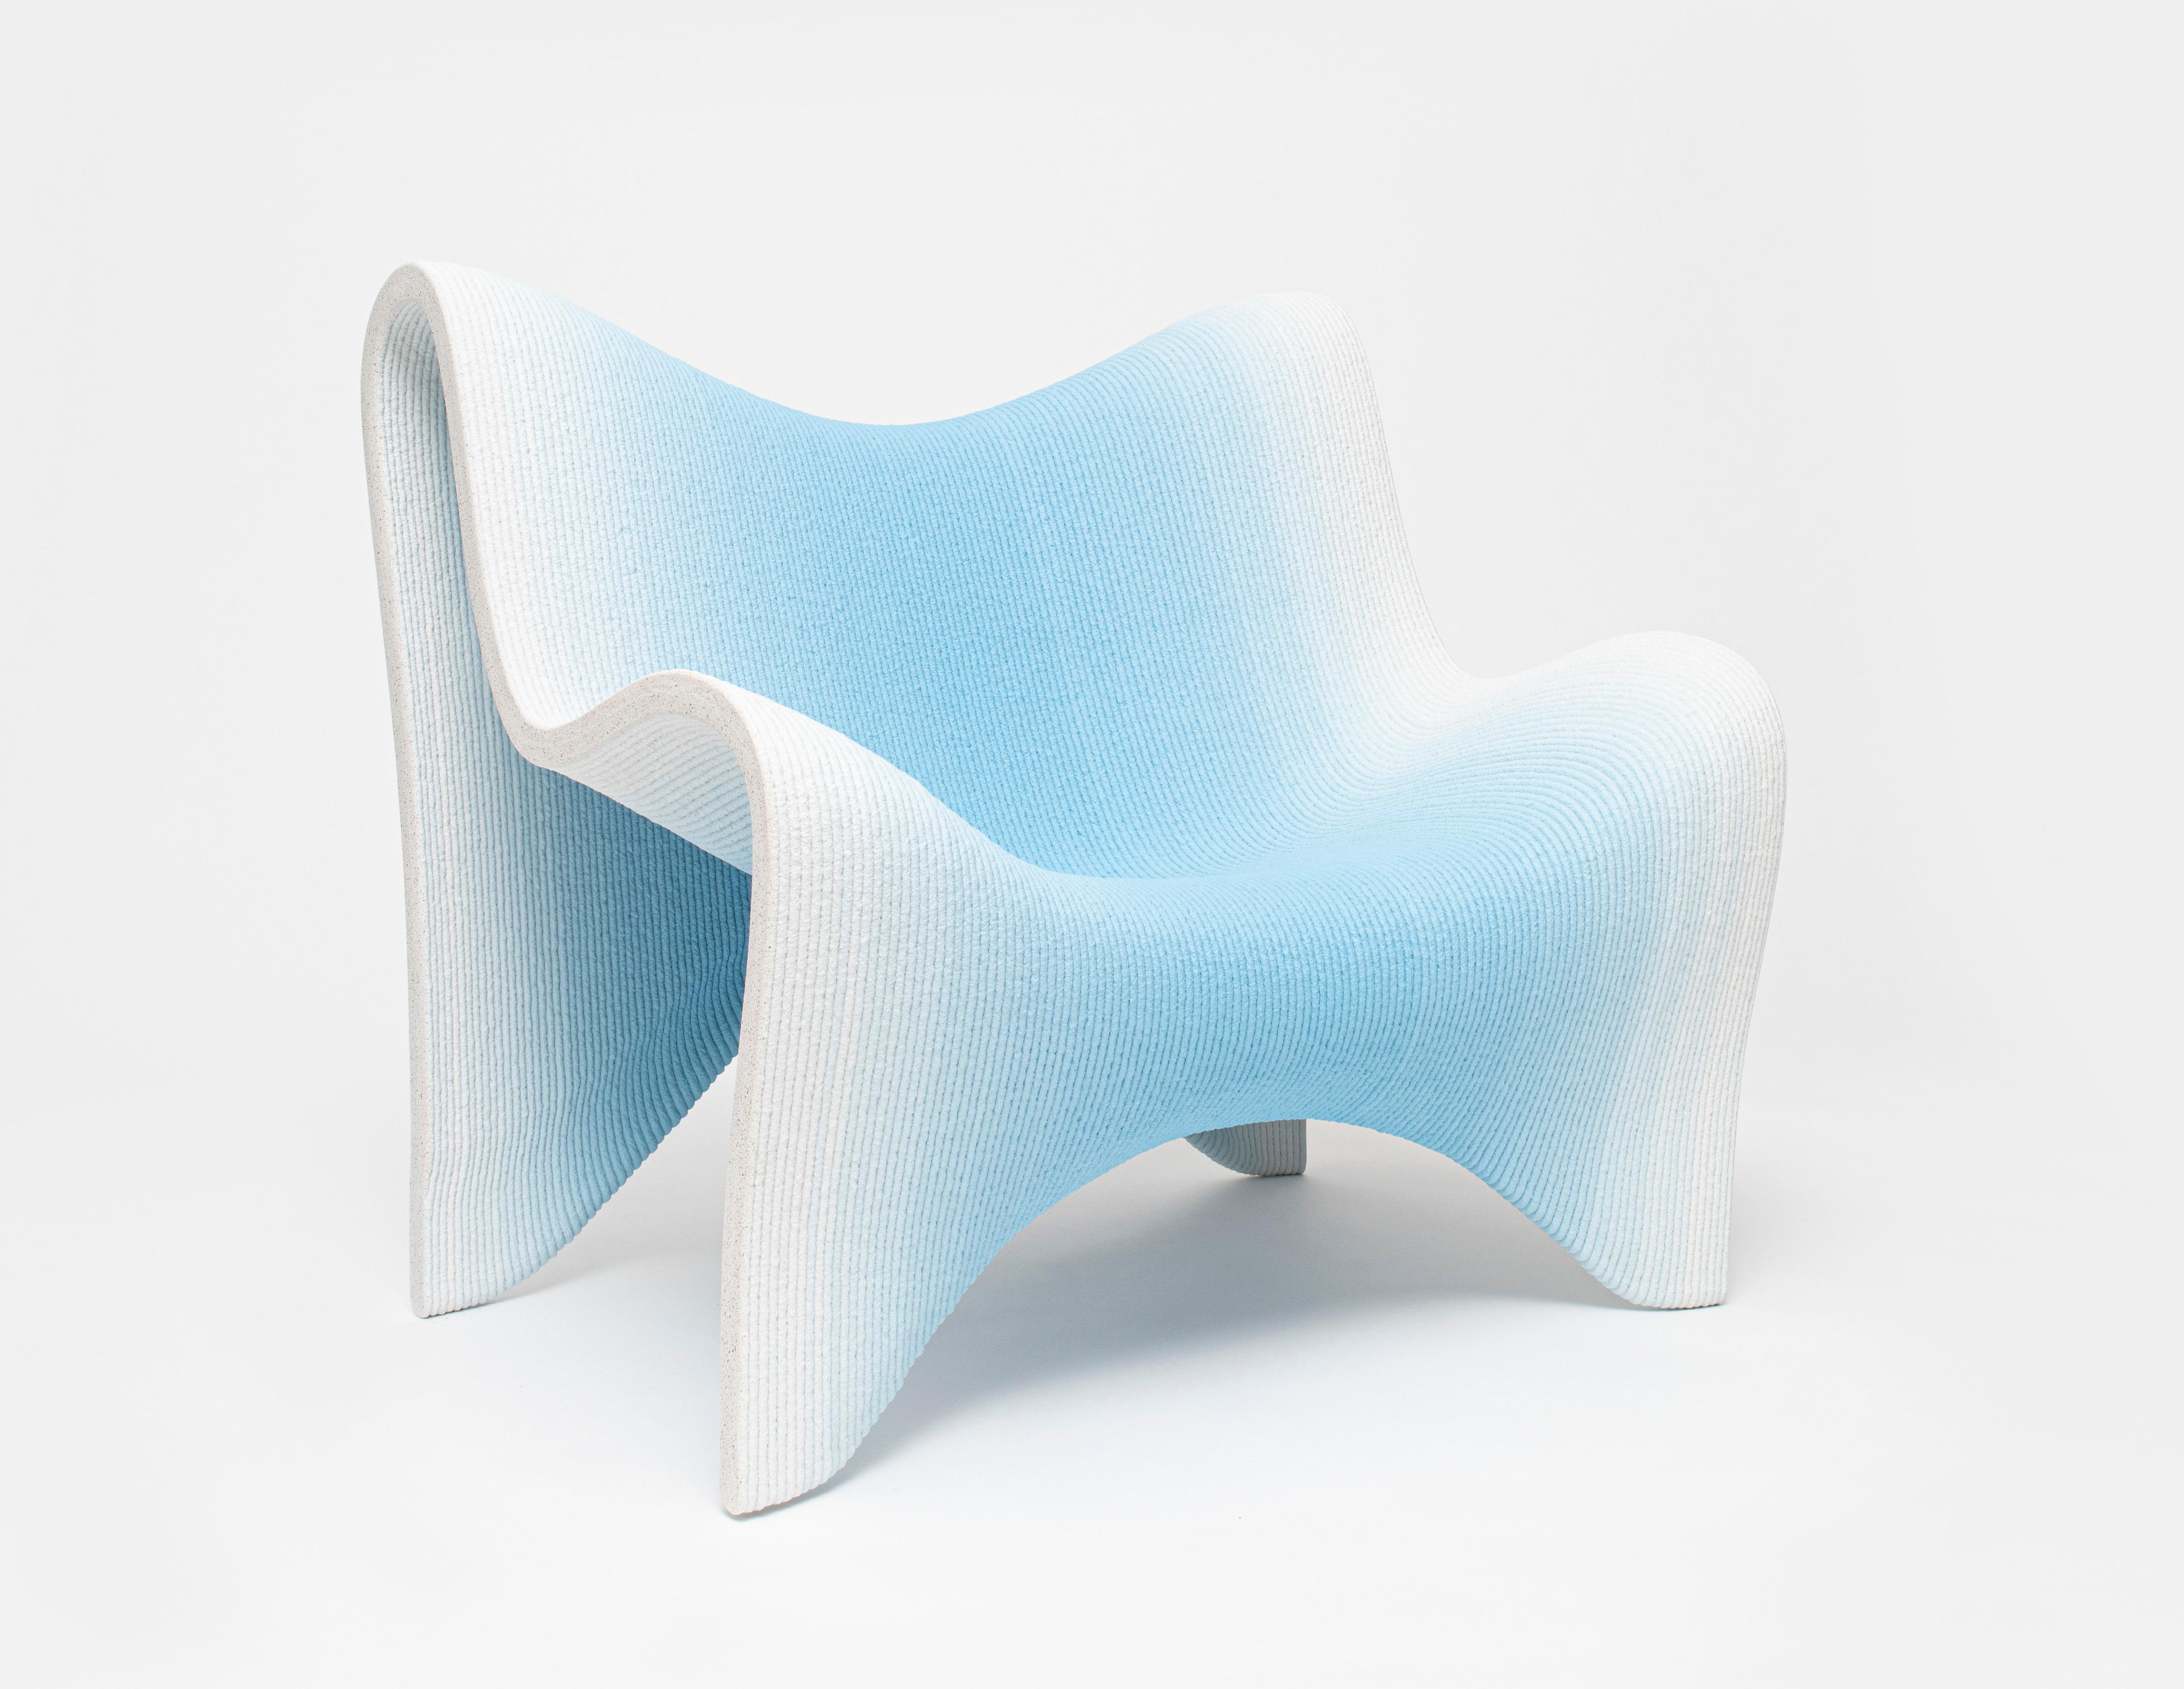 Limited Edition of 8 + 2 A/P

Materials: 3D printed concrete dyed, reinforced with steel

The 3D printed gradient furniture collection is Philipp Aduatz latest project in the field of 3D concrete printing in collaboration with the Austrian